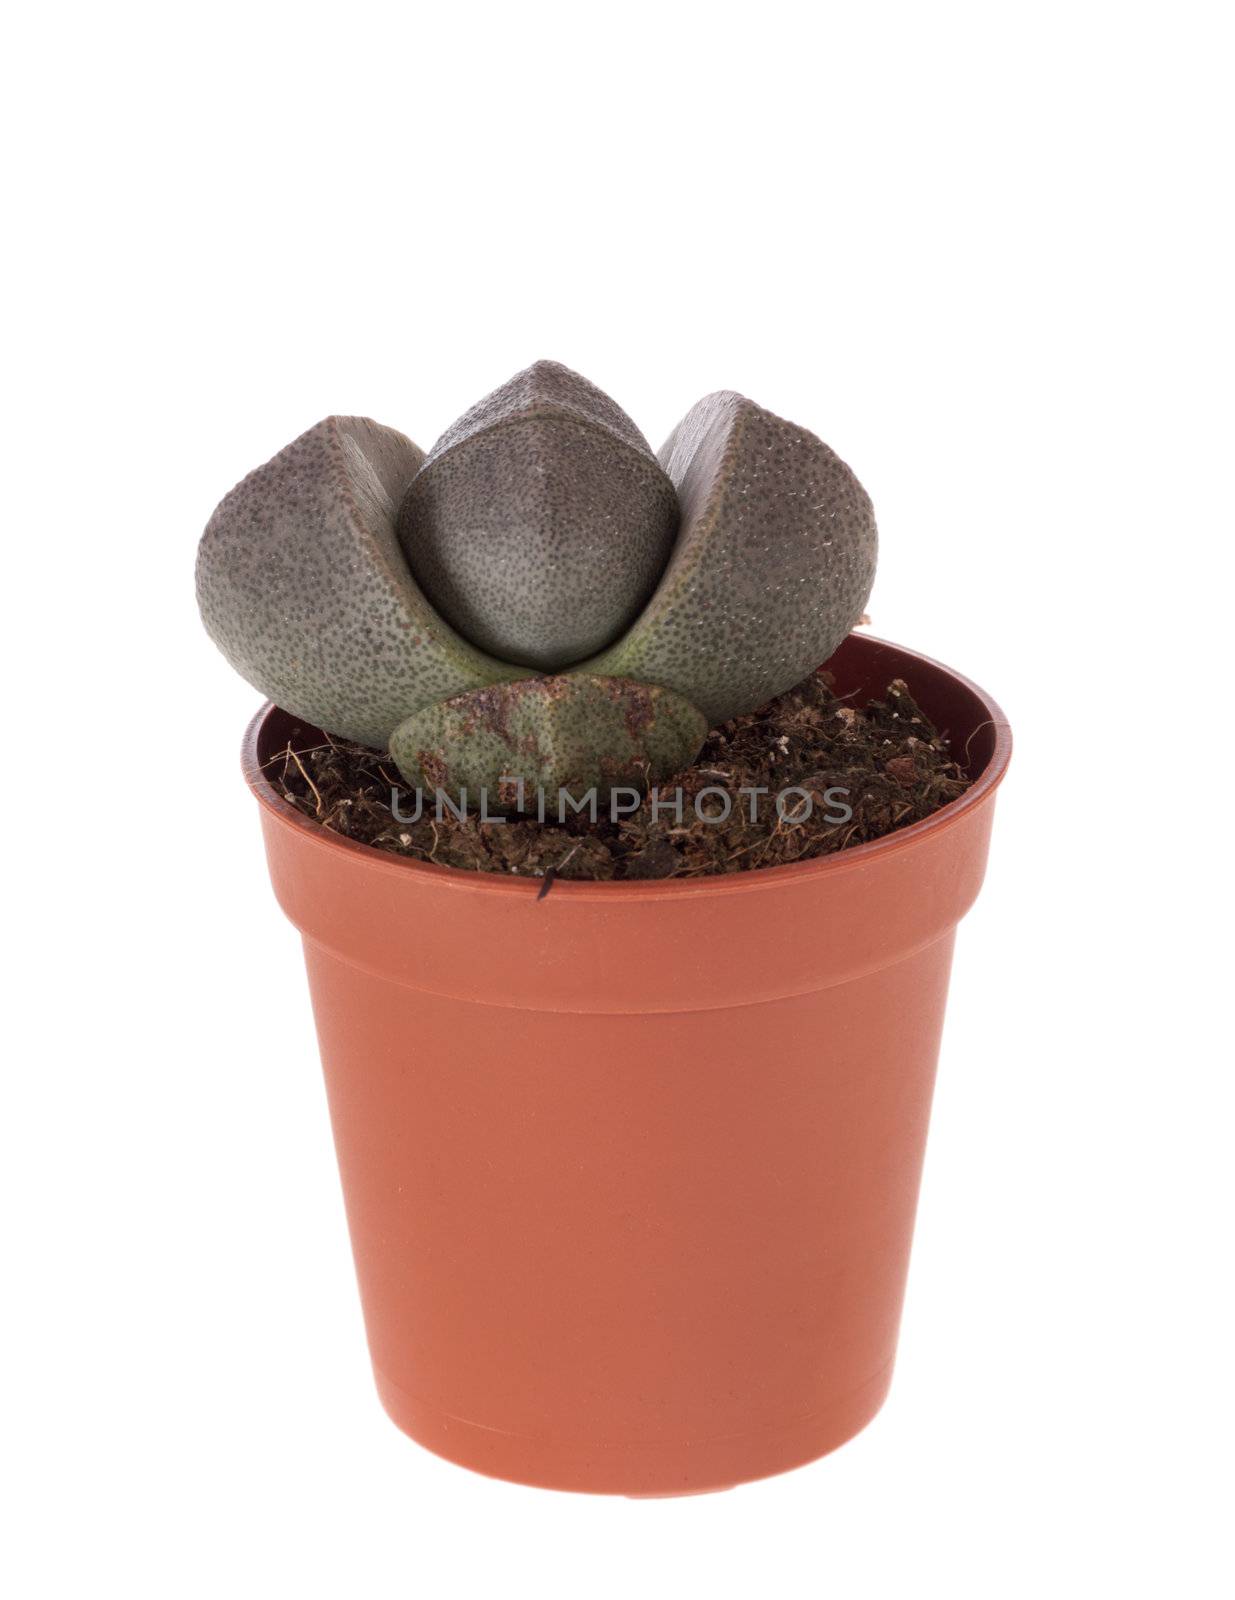 Lithops - Green dotted thornless cactus, isolated on white